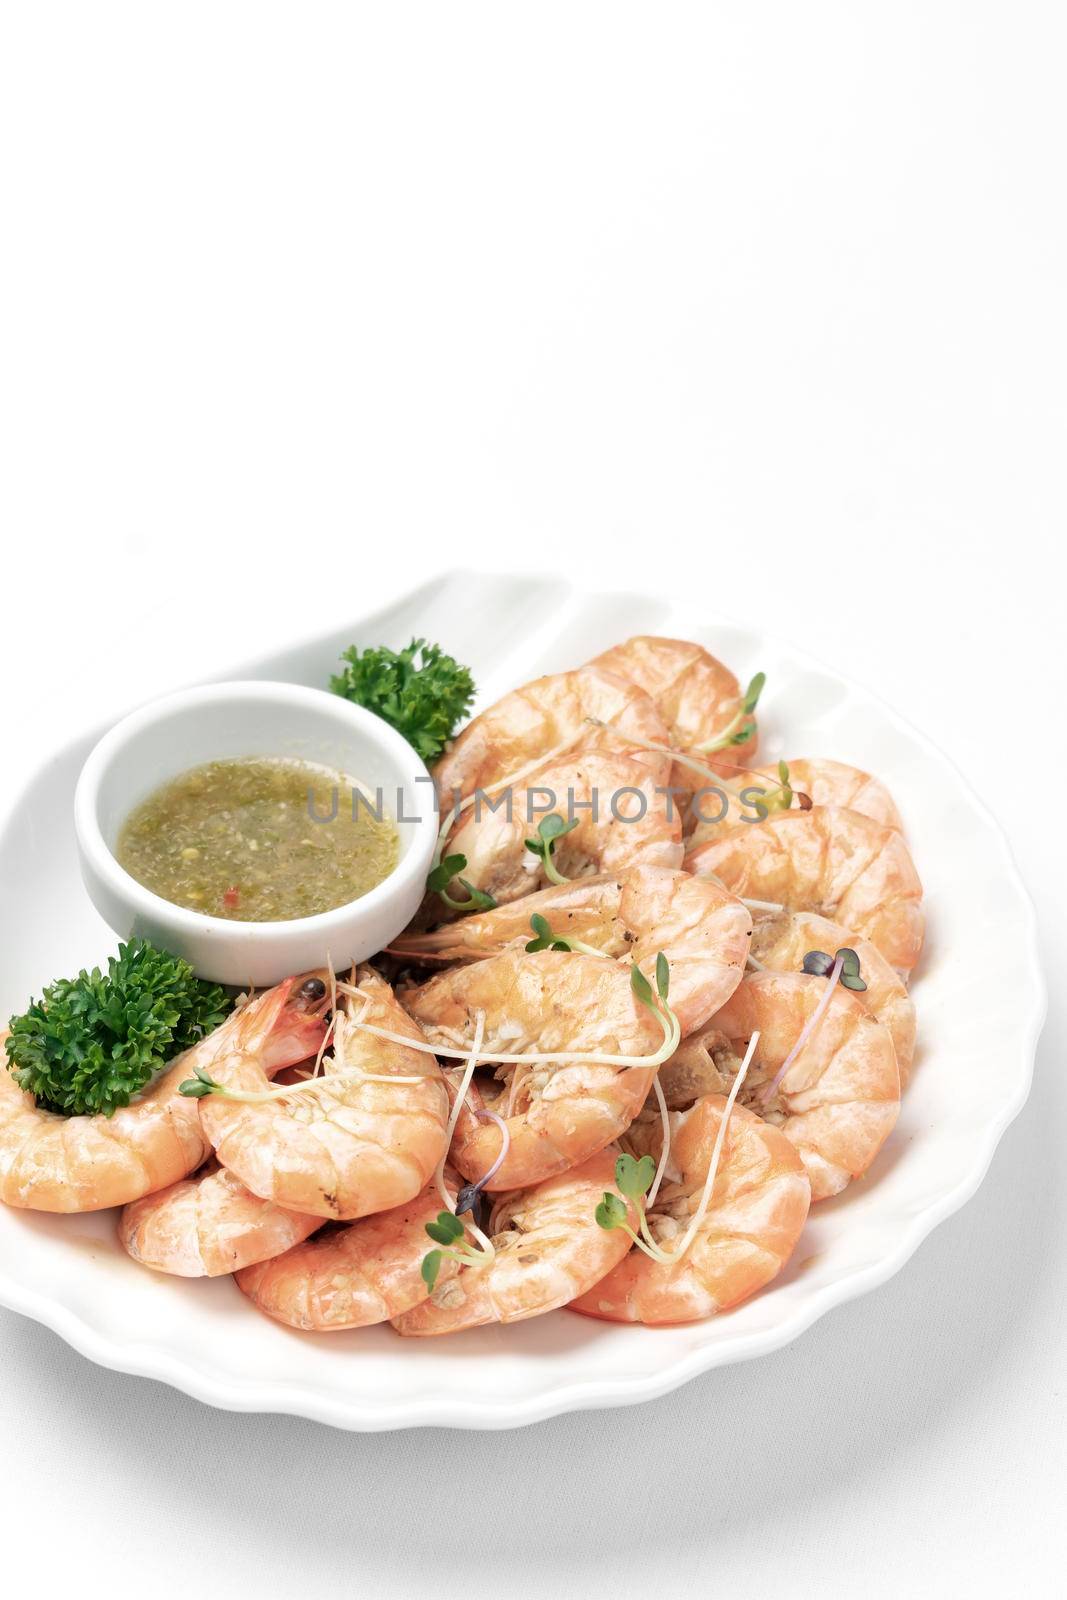 fresh boiled prawns with zesty citrus dipping sauce by jackmalipan